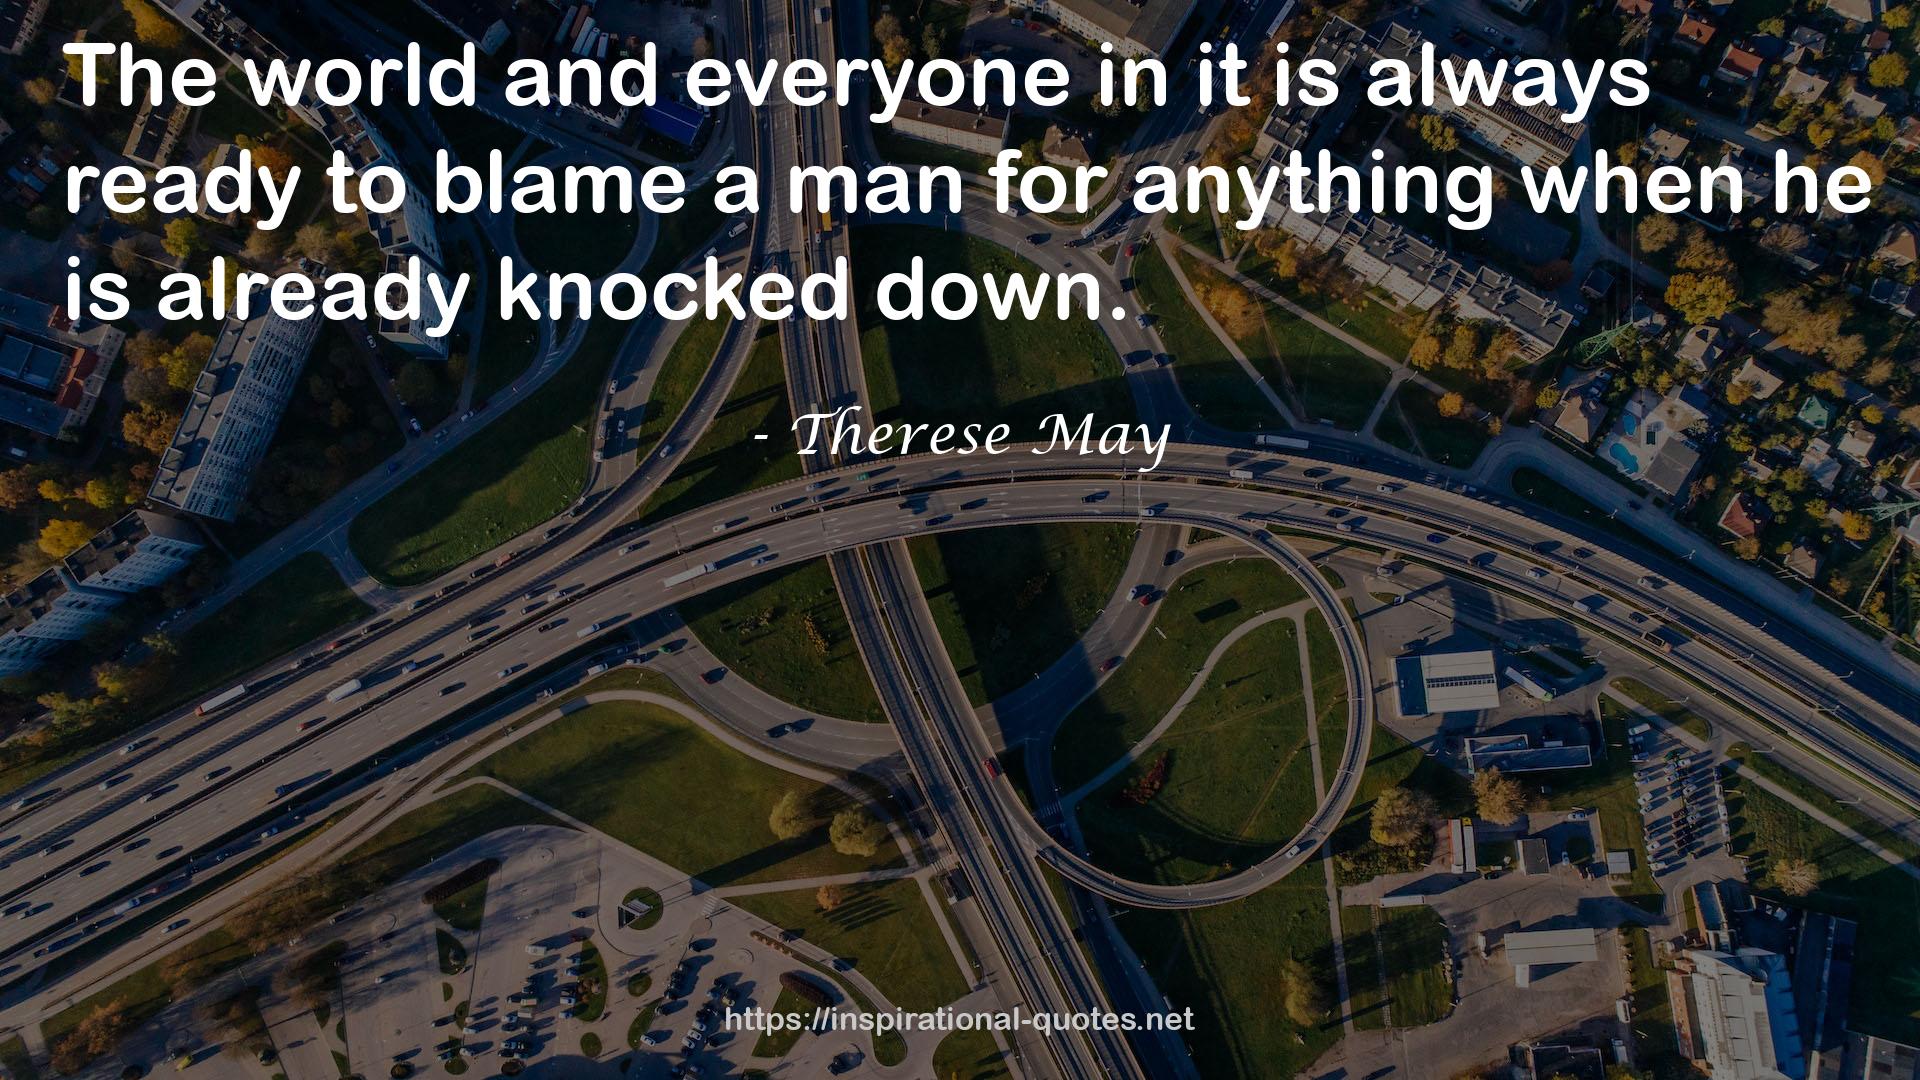 Therese May QUOTES